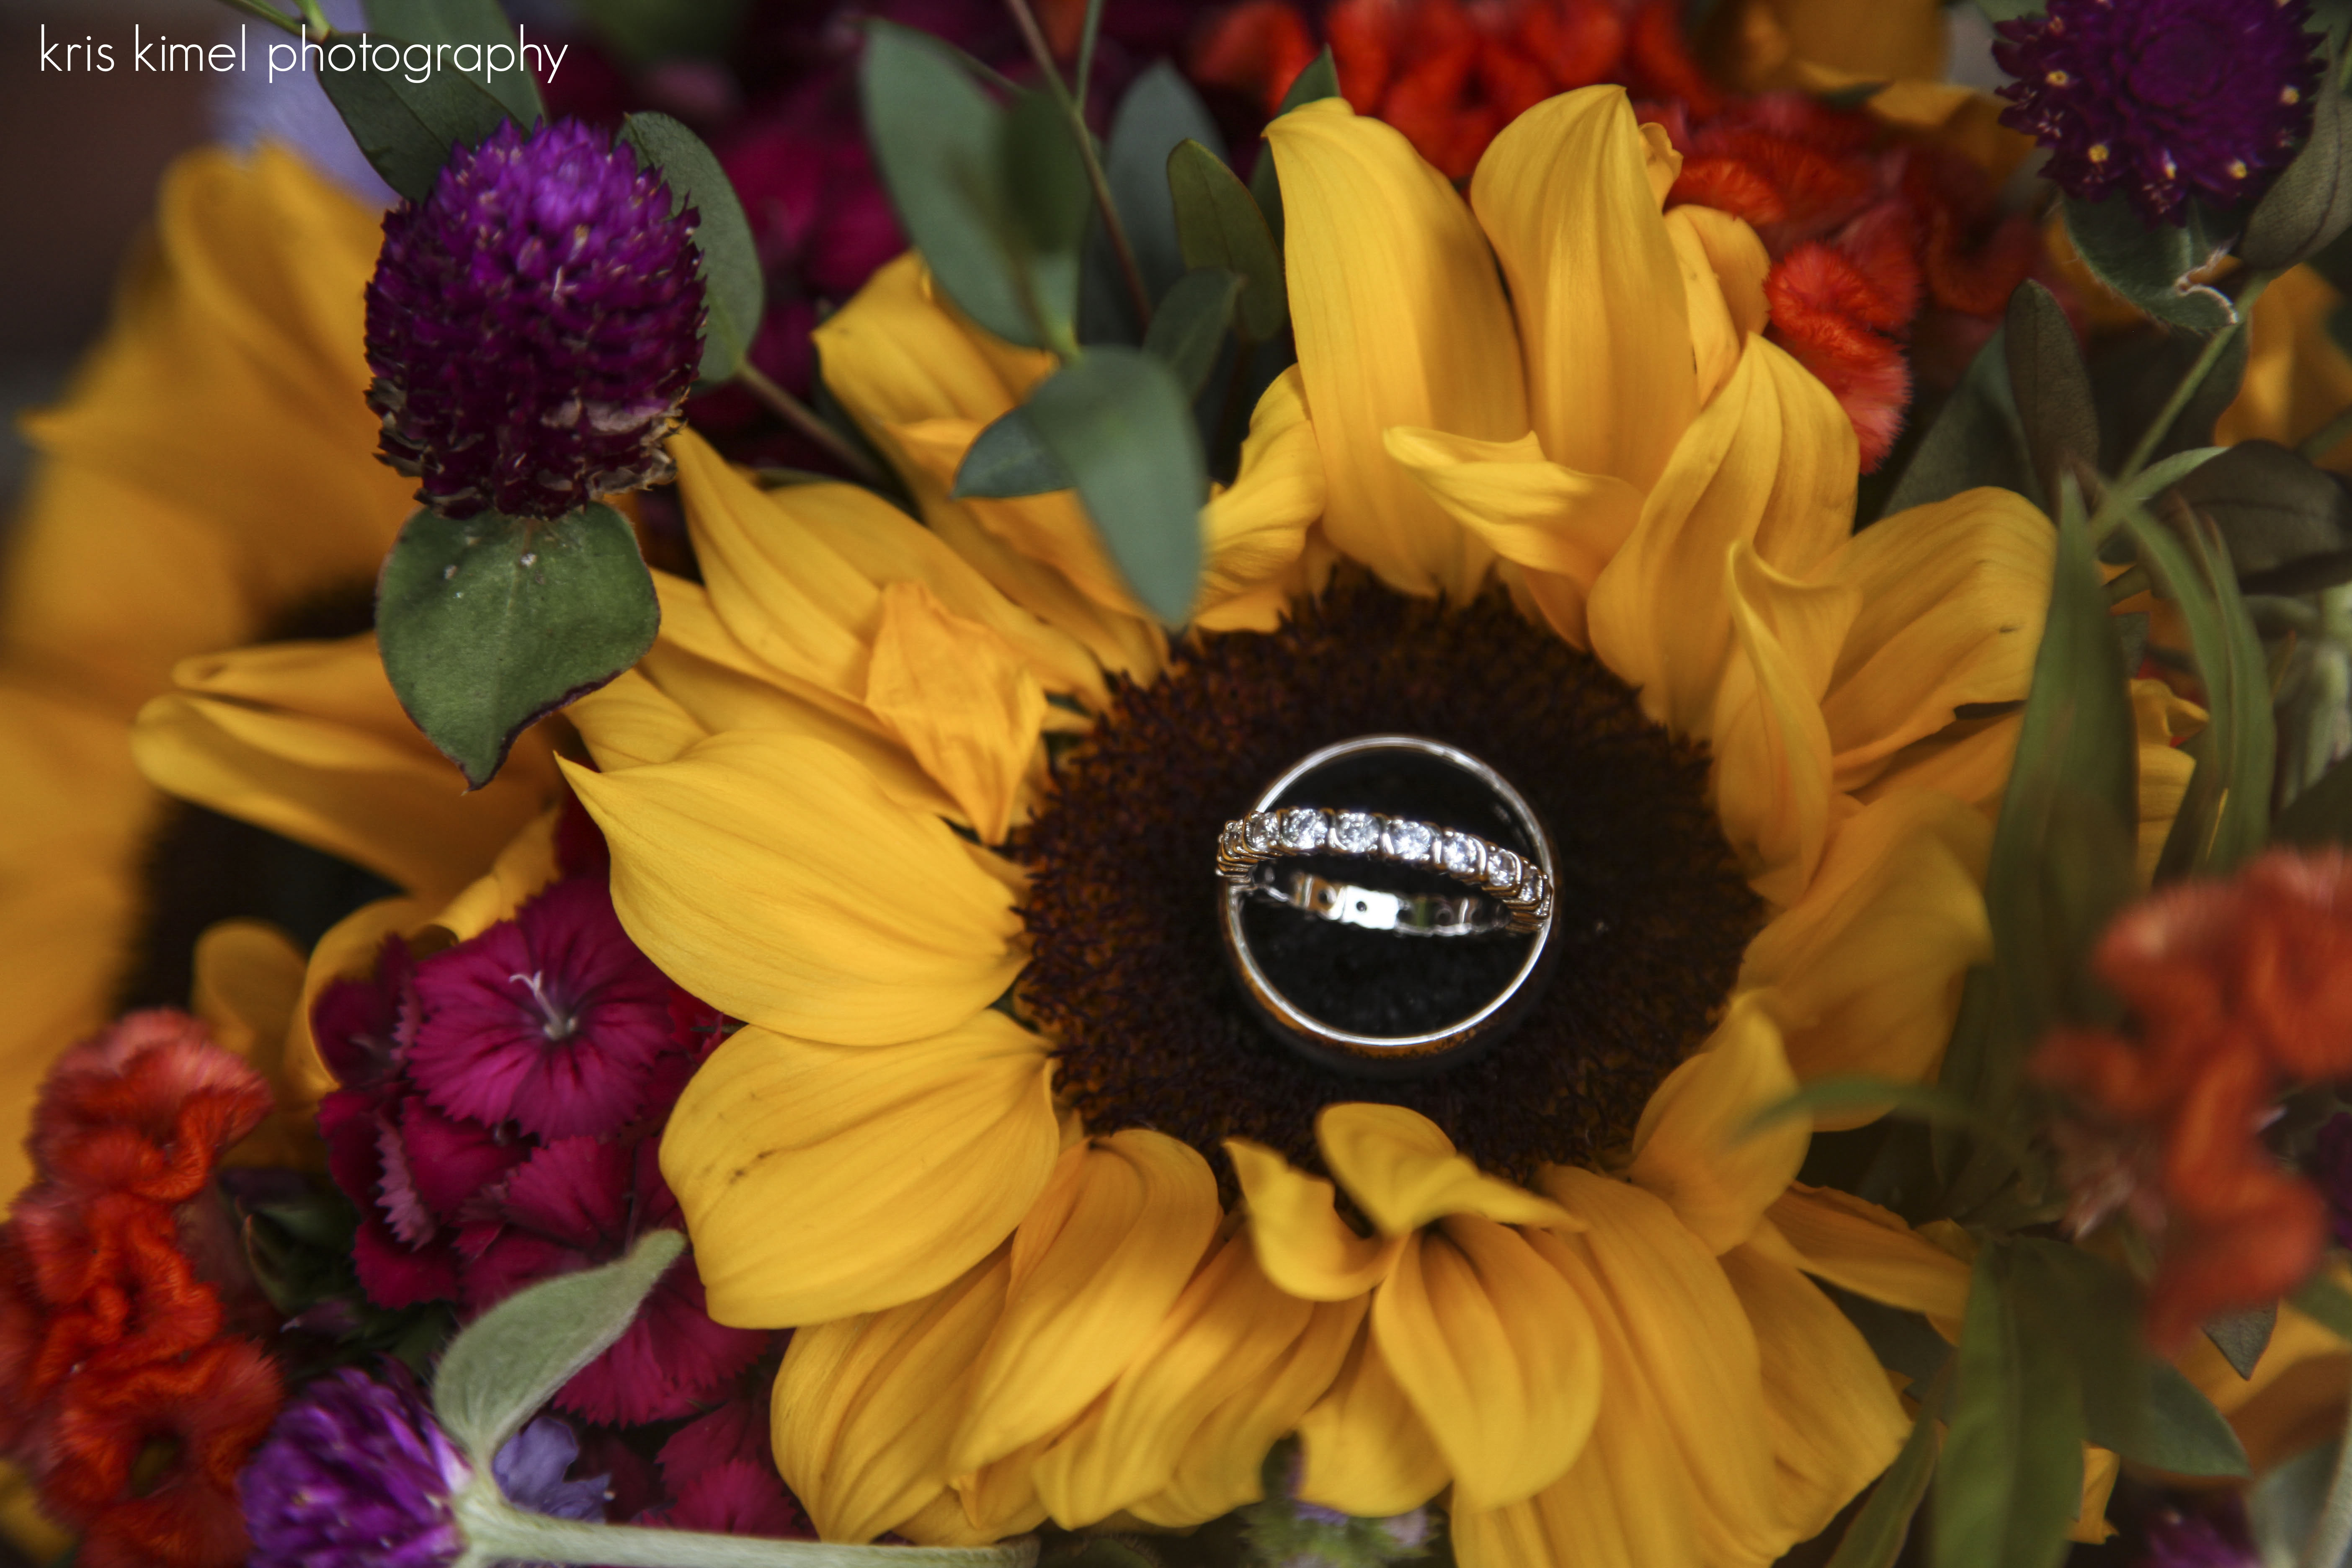 photo of sunflower wedding bouquet and wedding rings